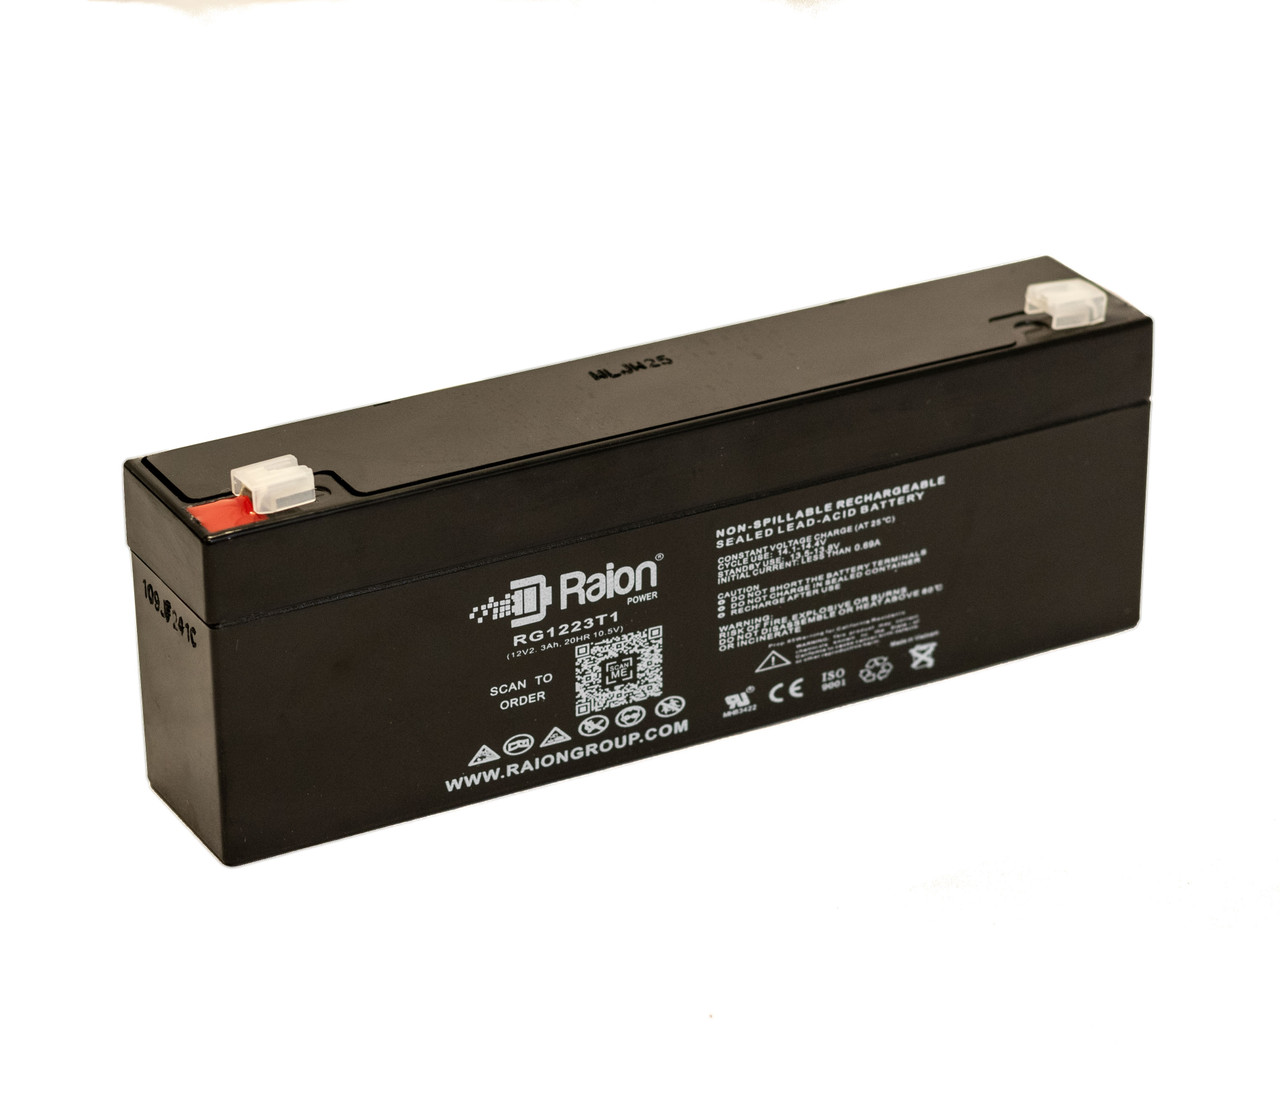 Raion Power RG1223T1 Replacement Battery for Sscor 2014A